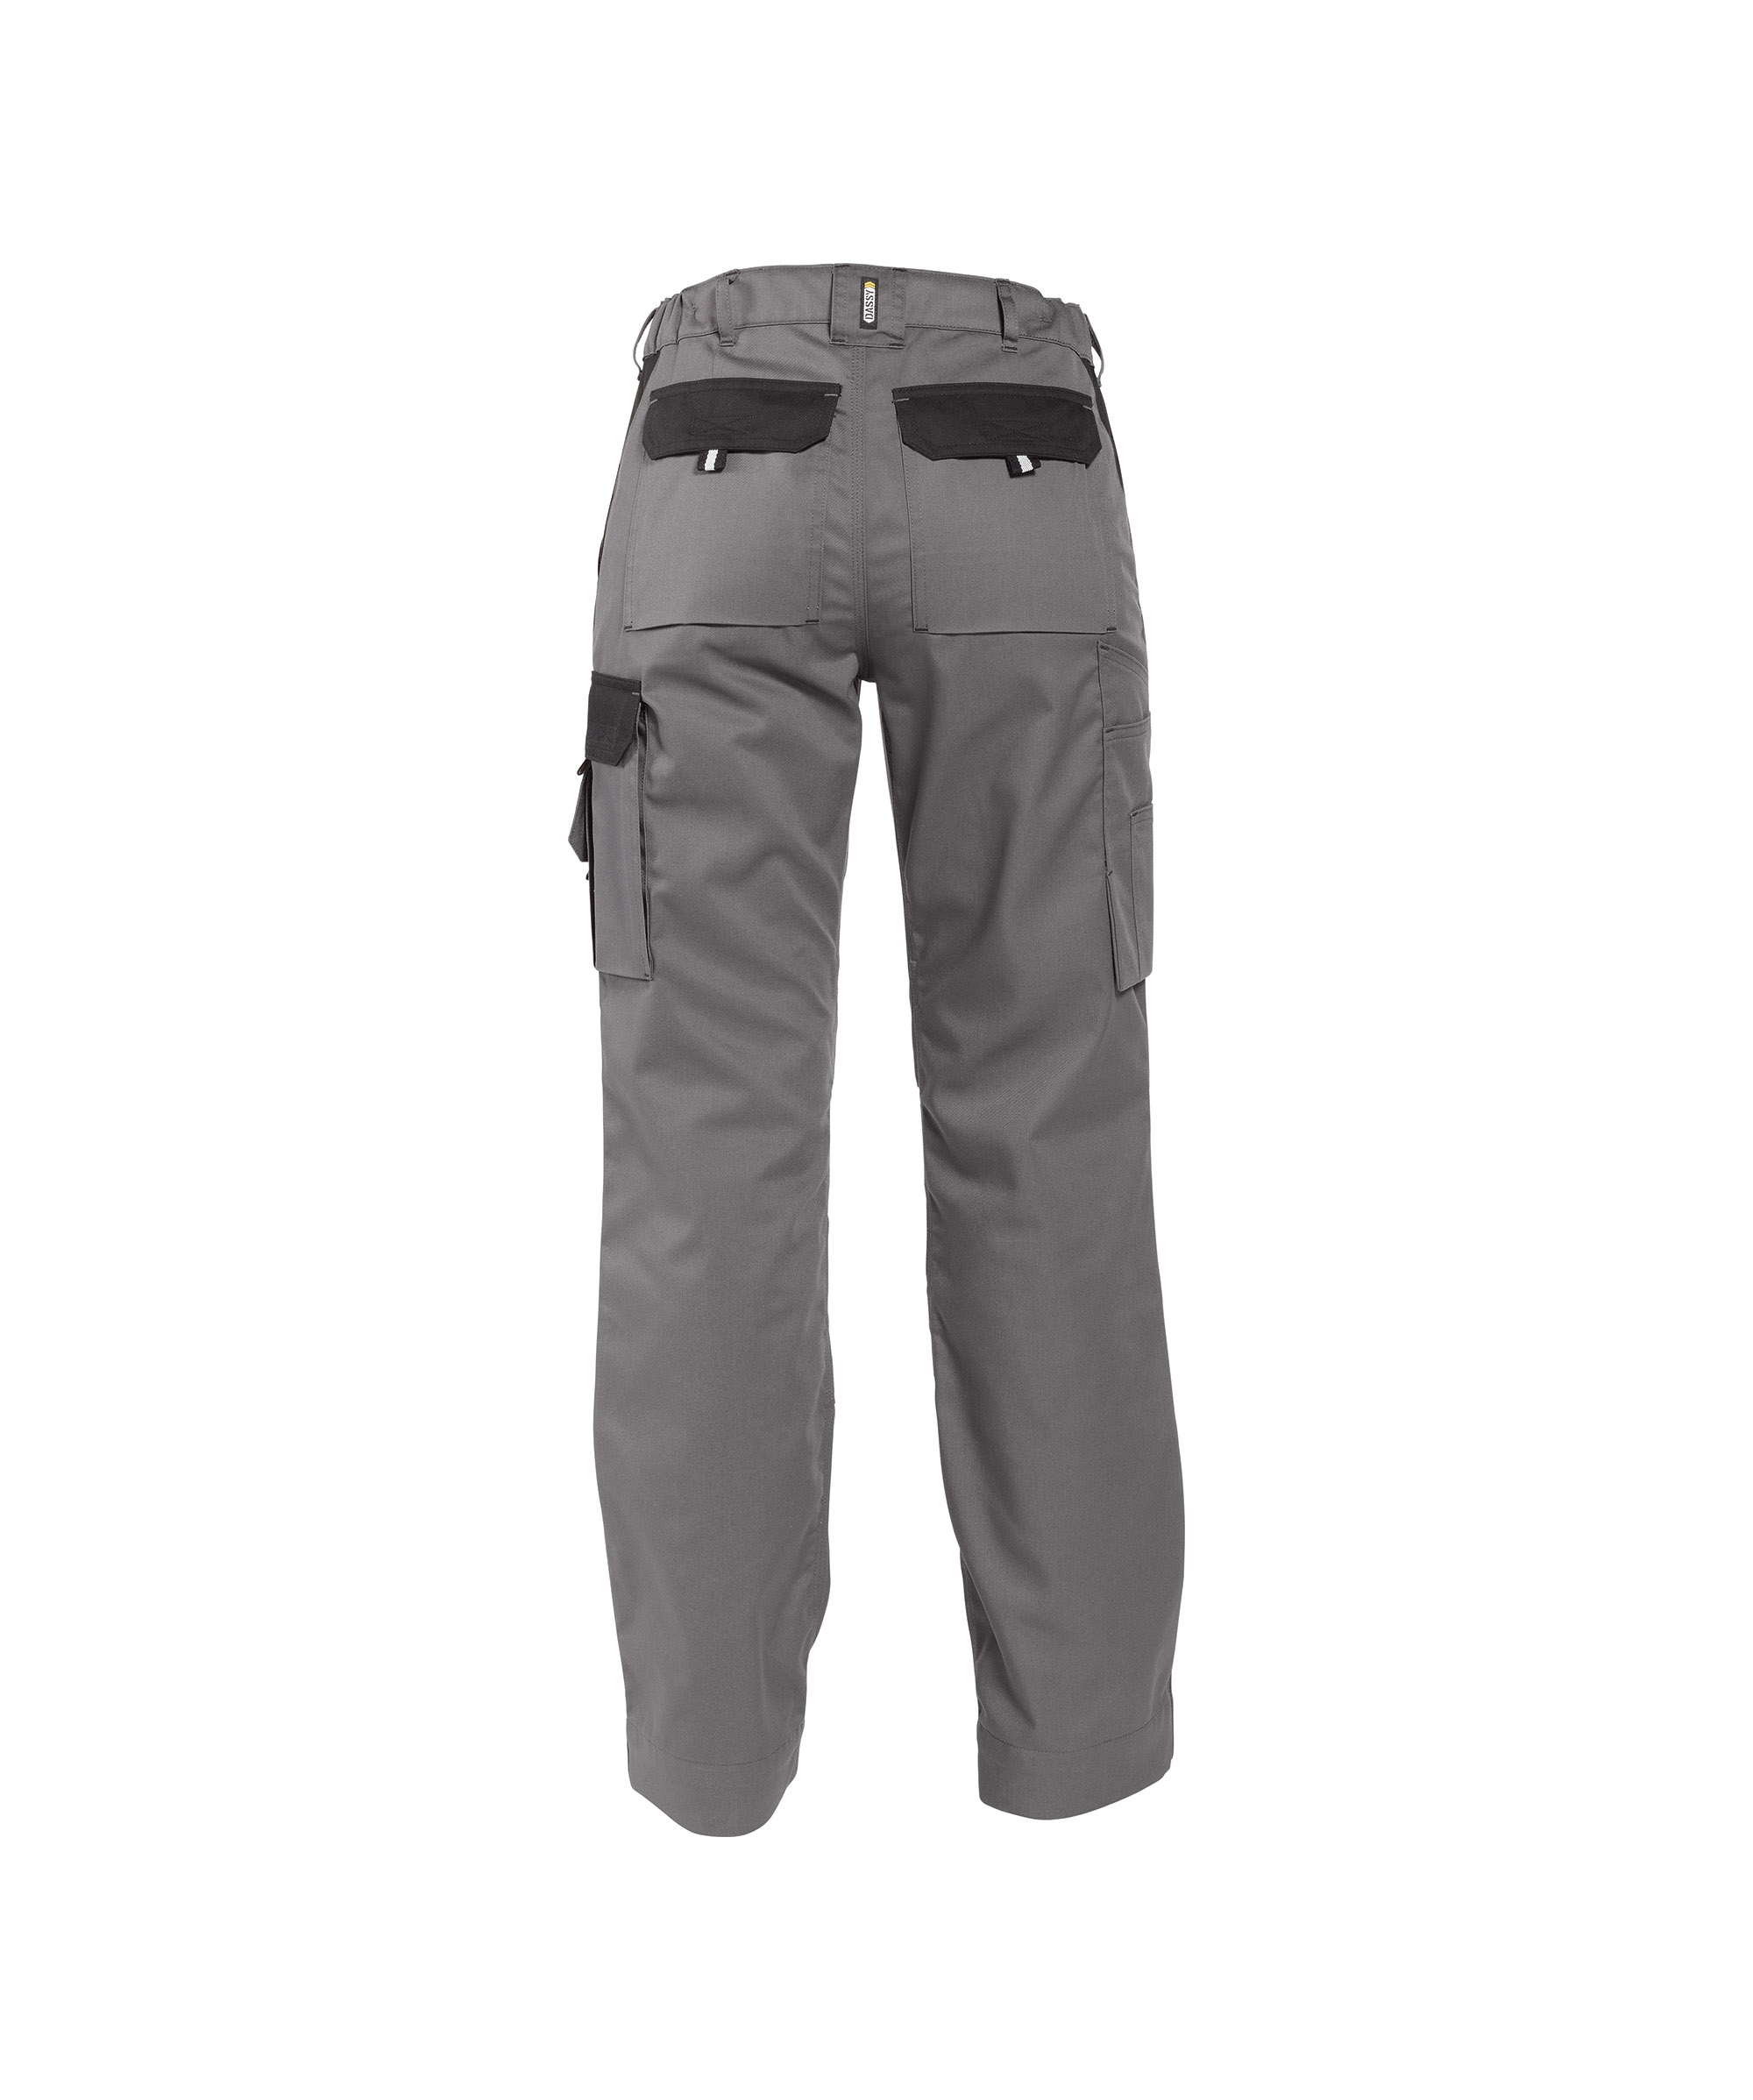 boston-women_two-tone-work-trousers-with-knee-pockets_cement-grey-black_back.jpg